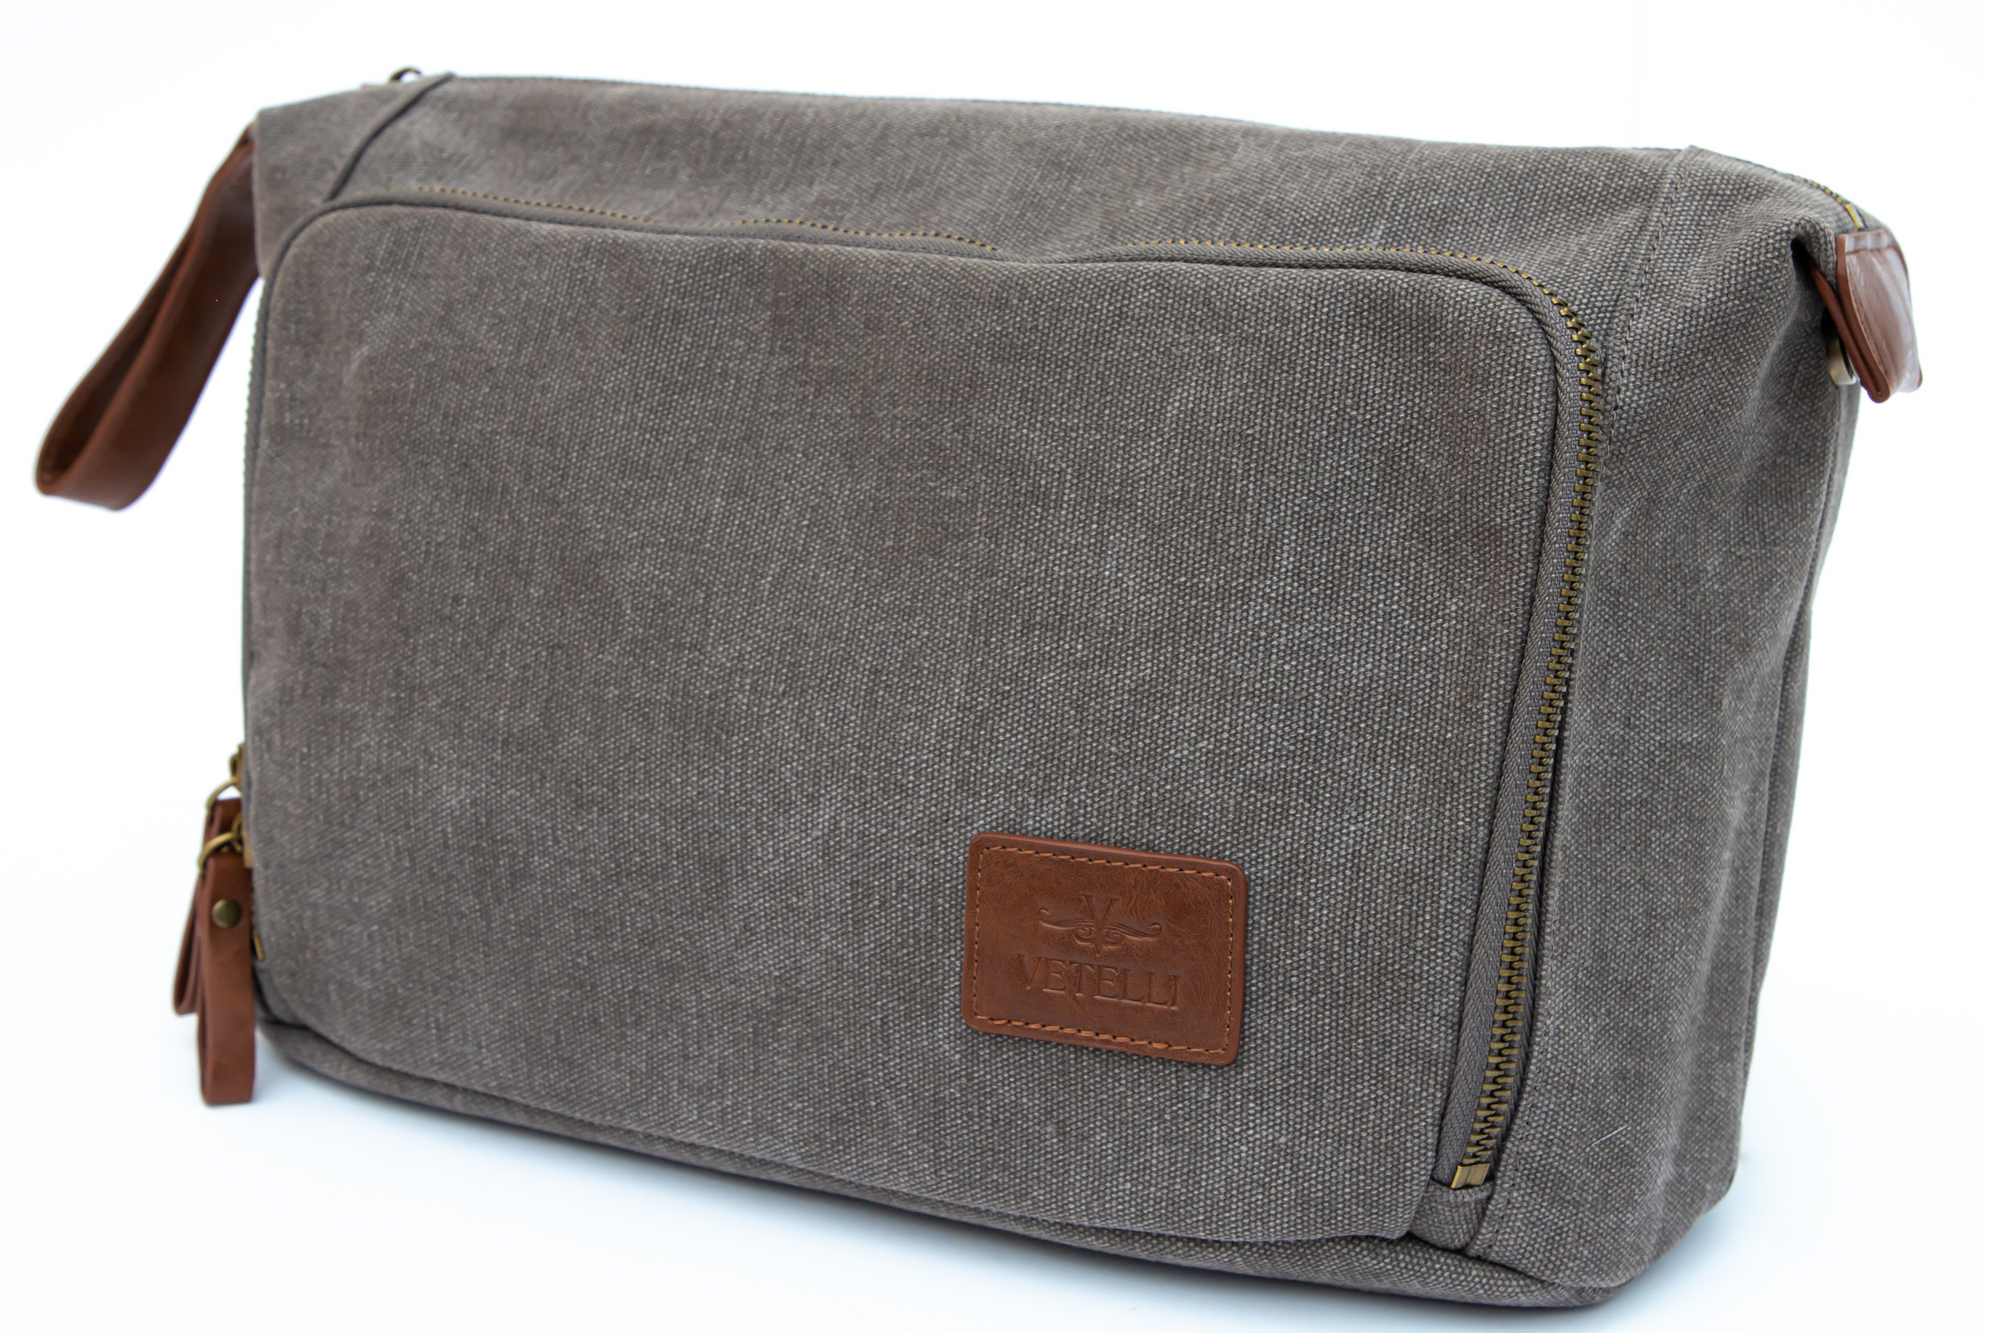 The Messner Canvas Toiletry Bag